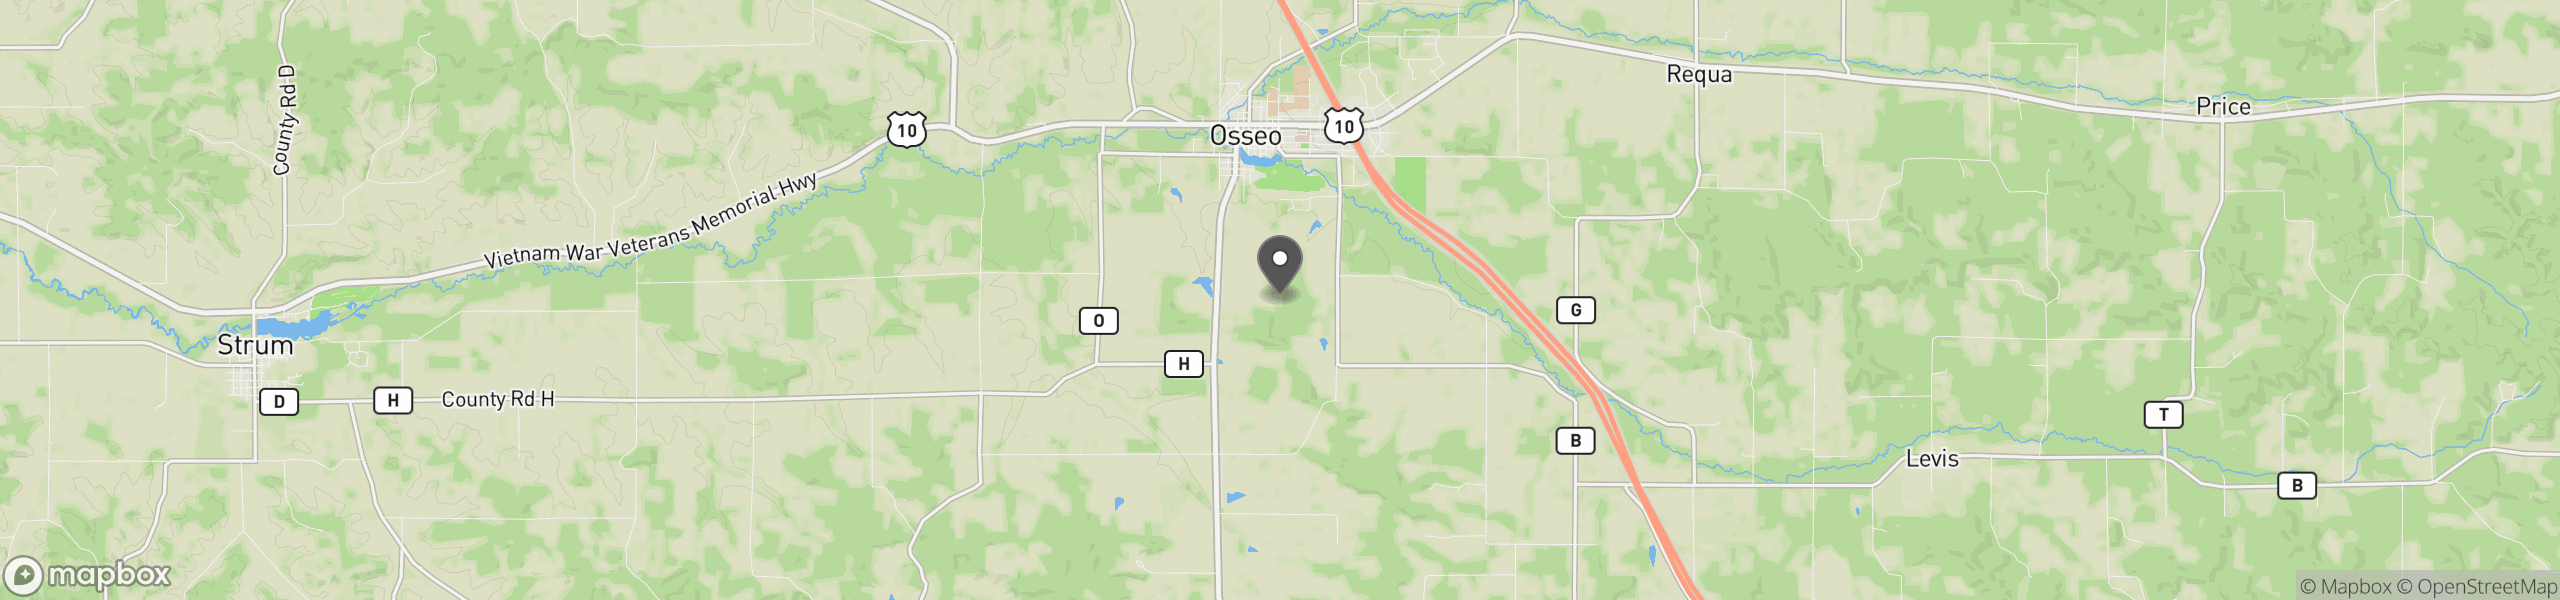 Osseo, WI